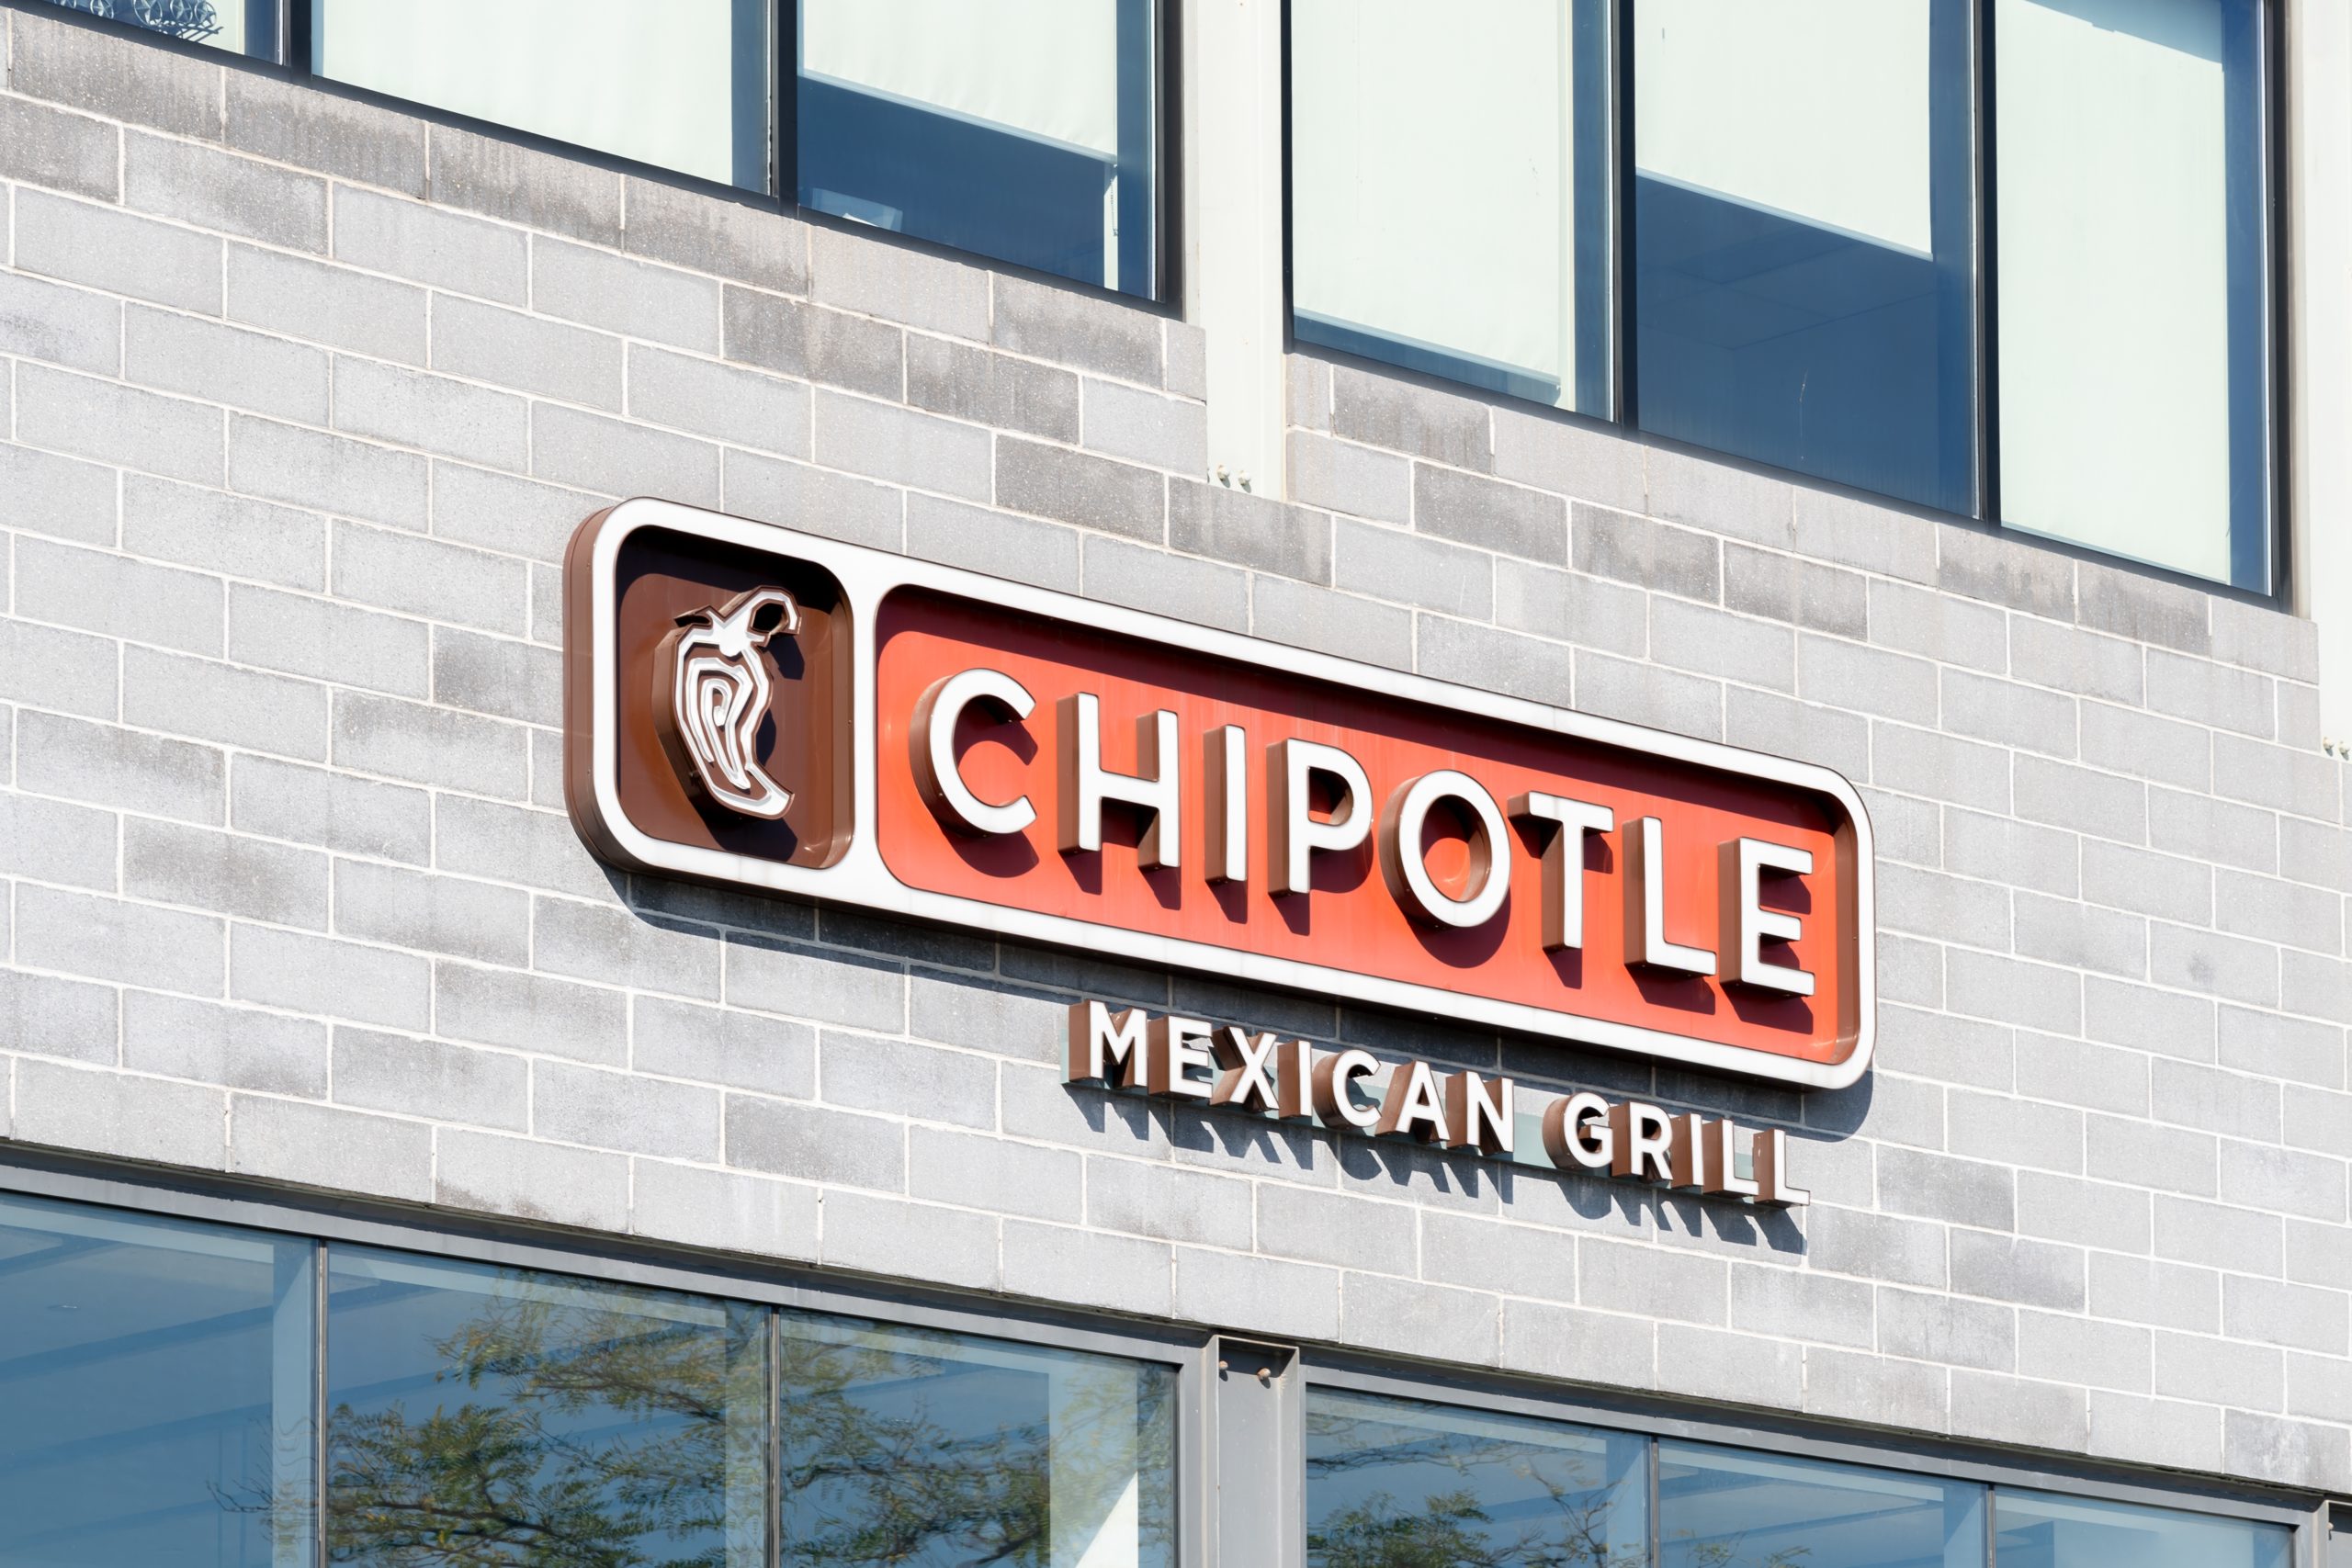 Chipotle Now Accepting Cryptocurrency Payments at US Locations